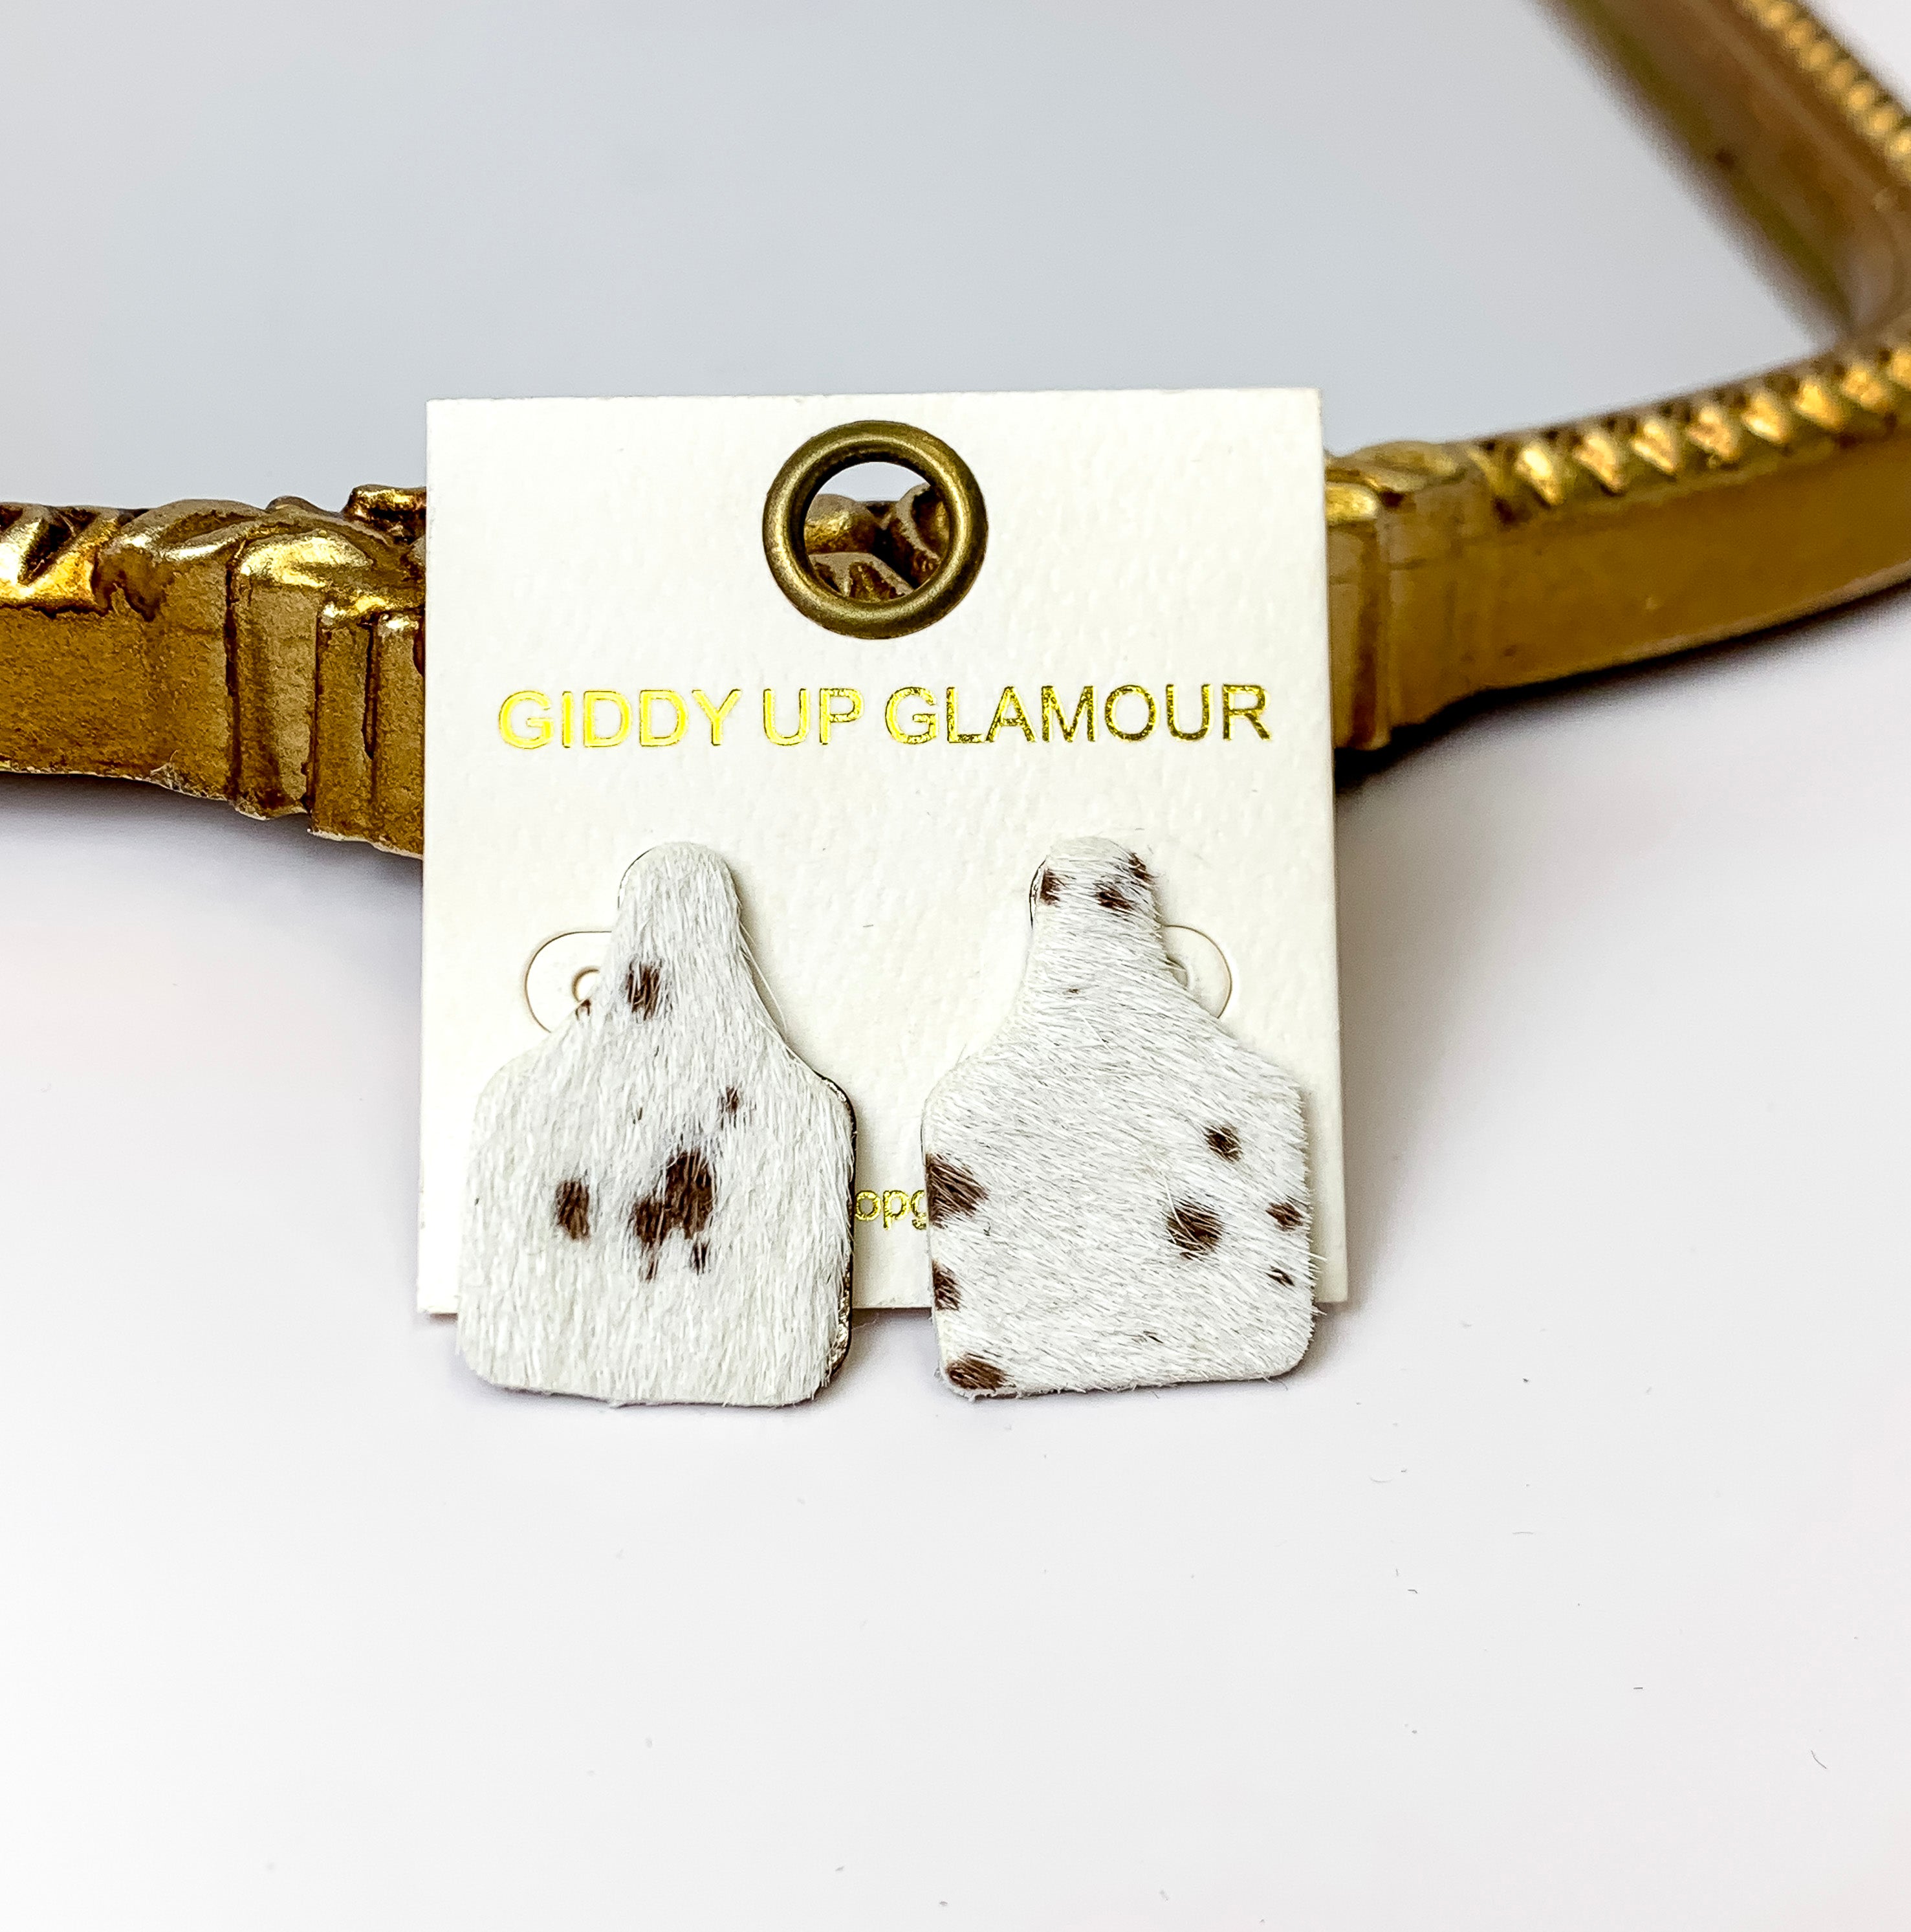 Cattle Tag Stud Earrings in White and Brown Cow Print - Giddy Up Glamour Boutique